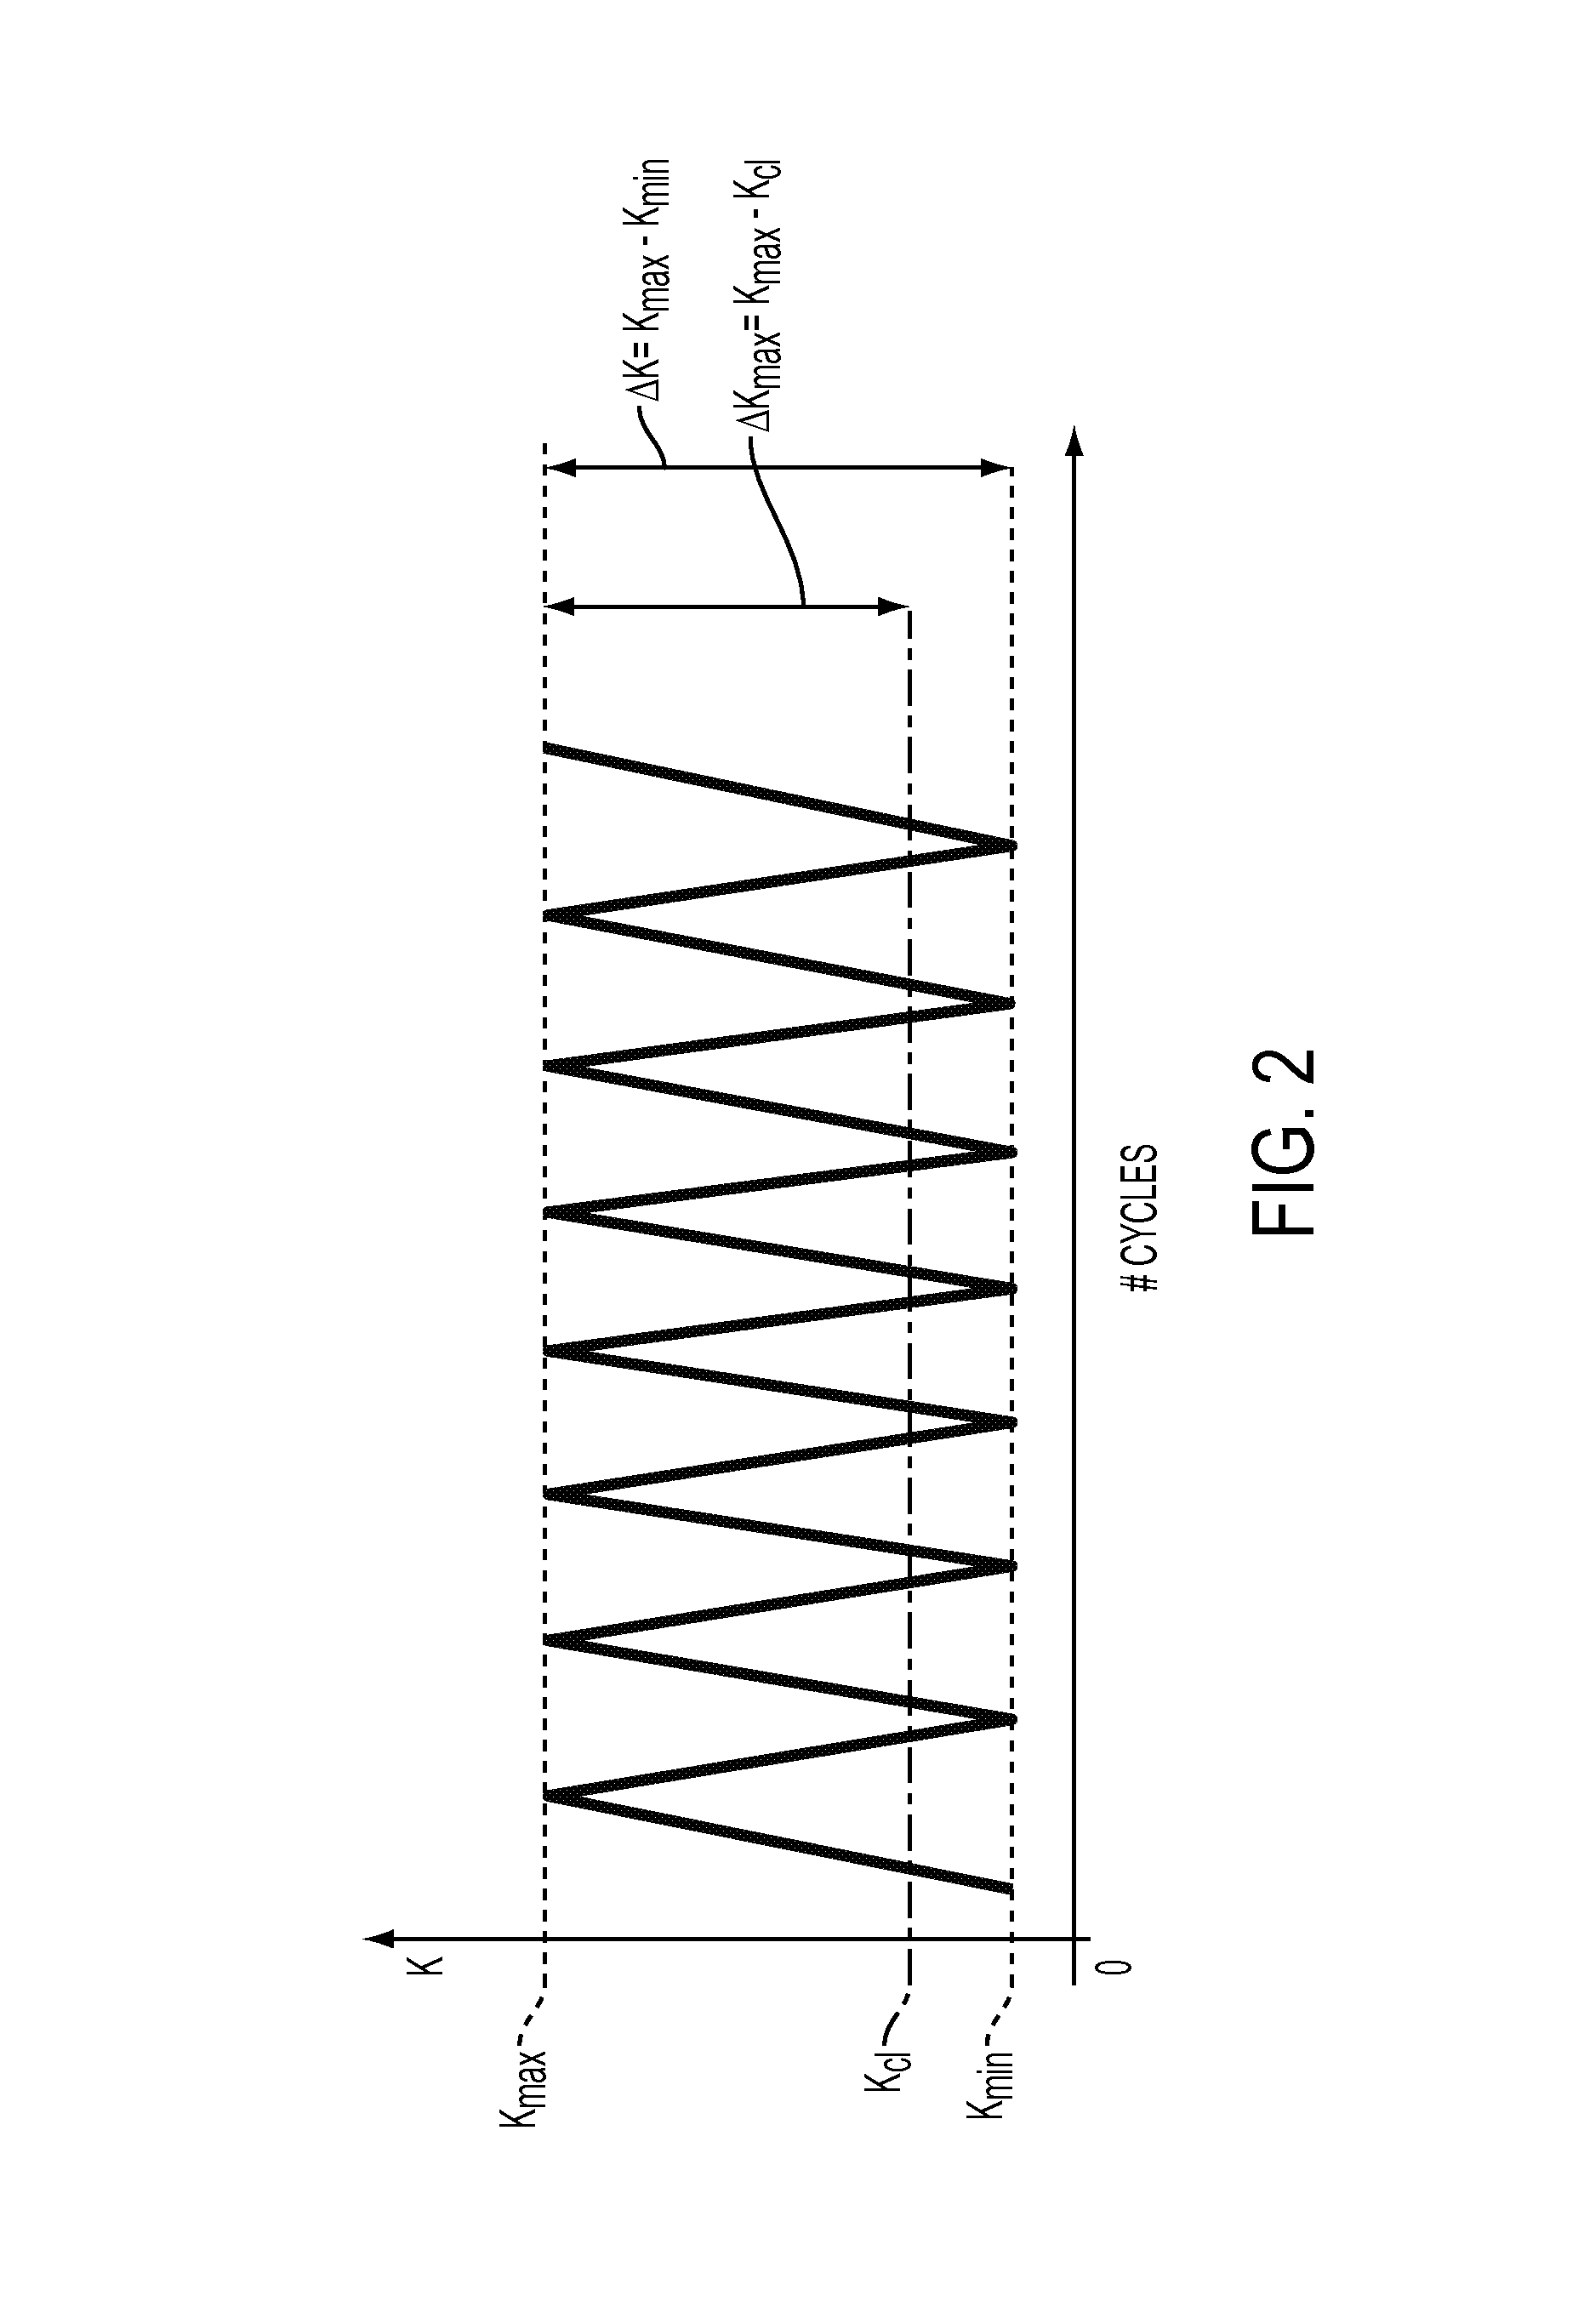 System and method for predicting material fatigue and damage